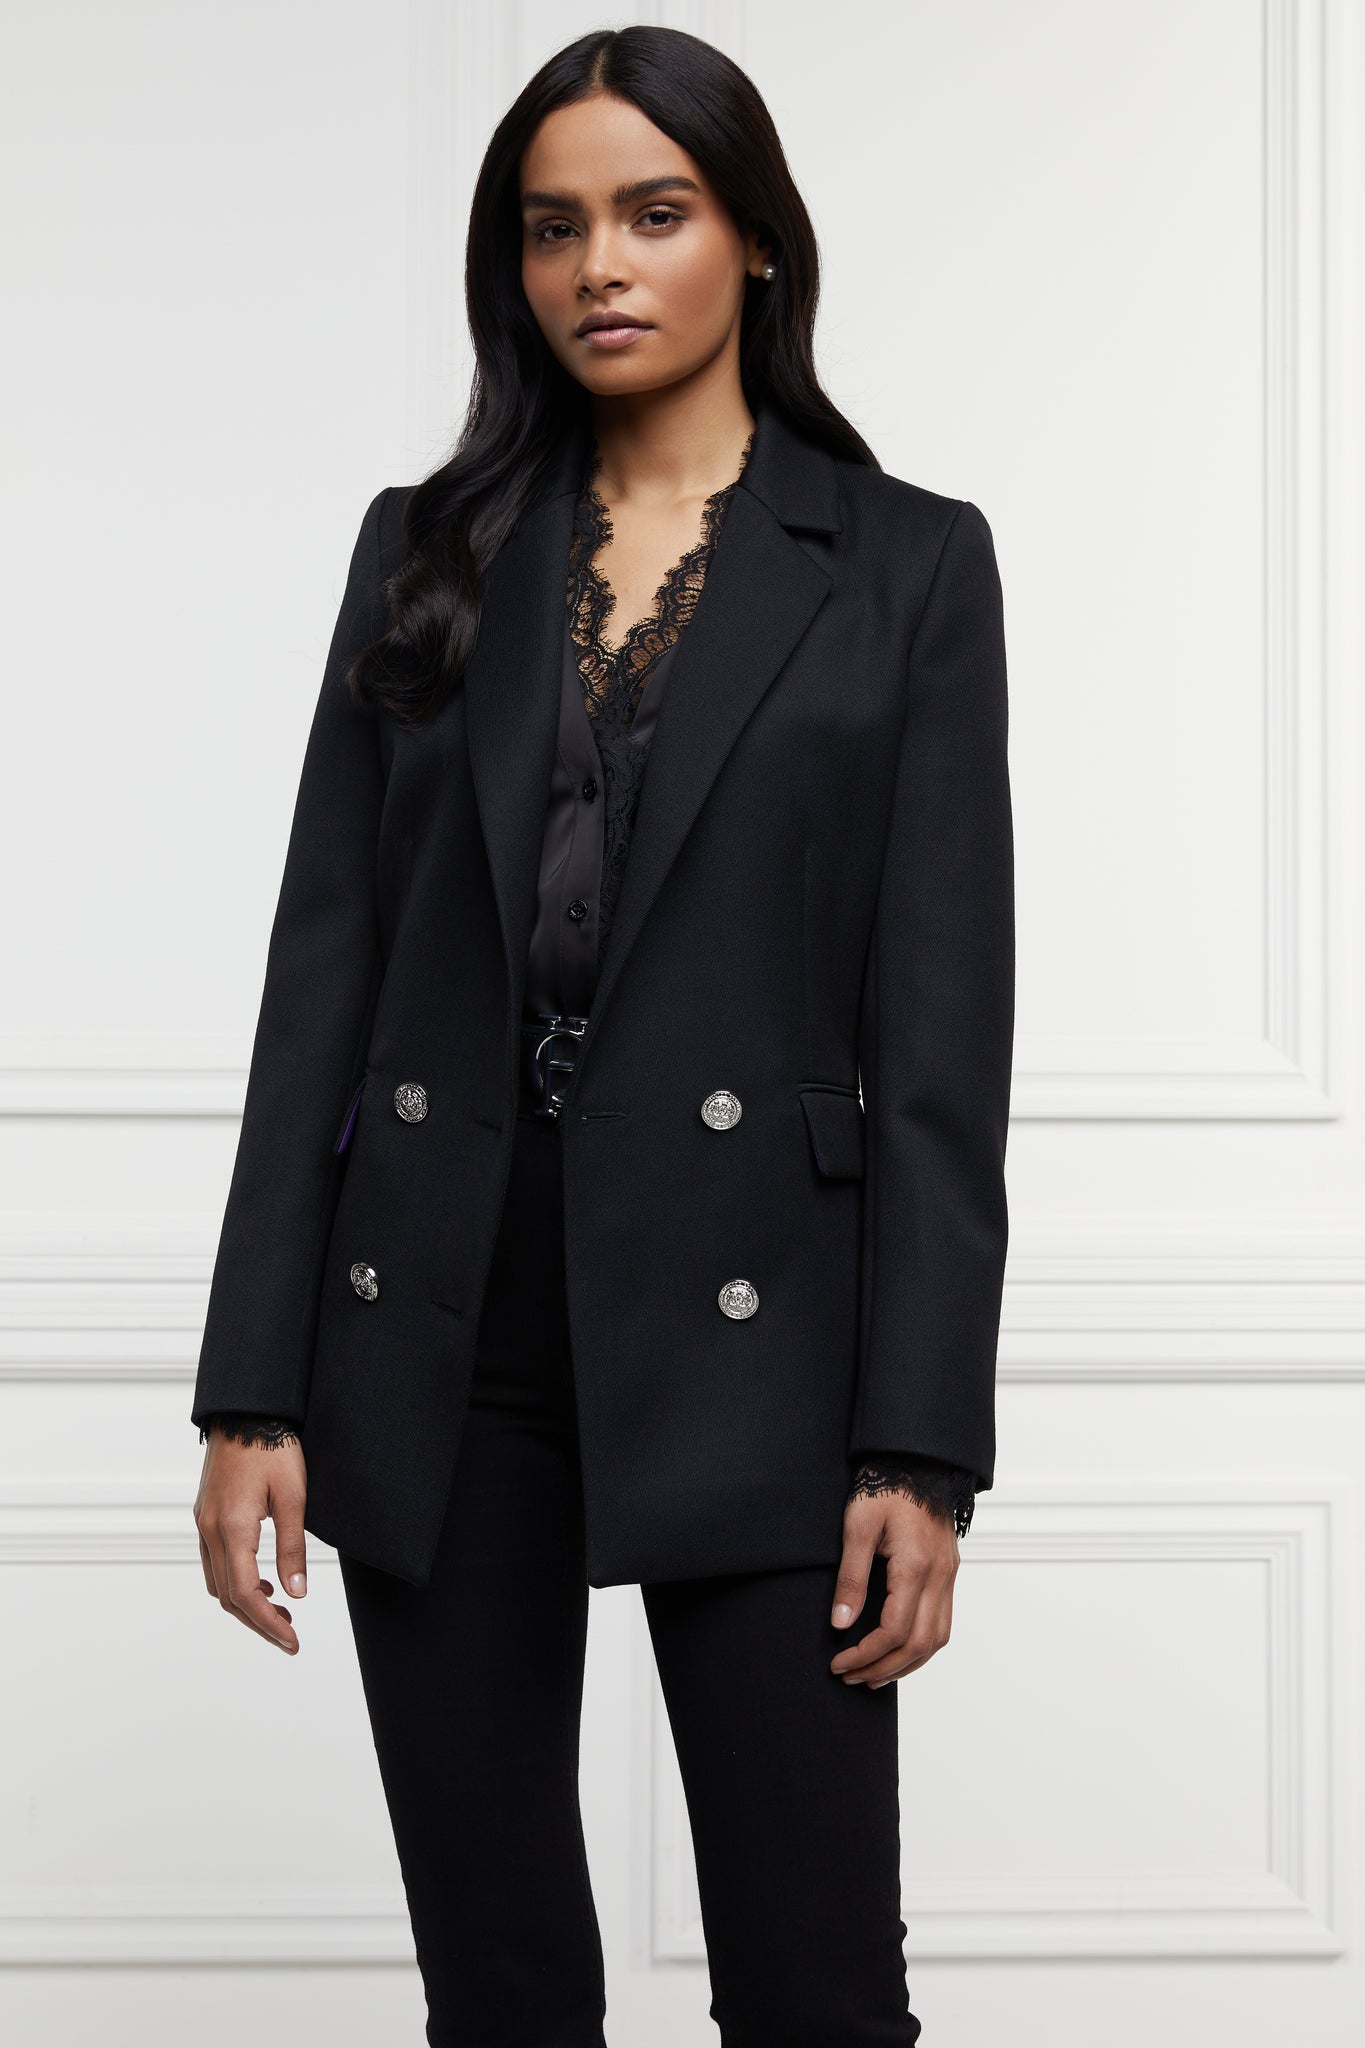 jubilee edition of double breasted wool blazer in black with two hip pockets and silver button details down front and on cuffs and handmade in the uk